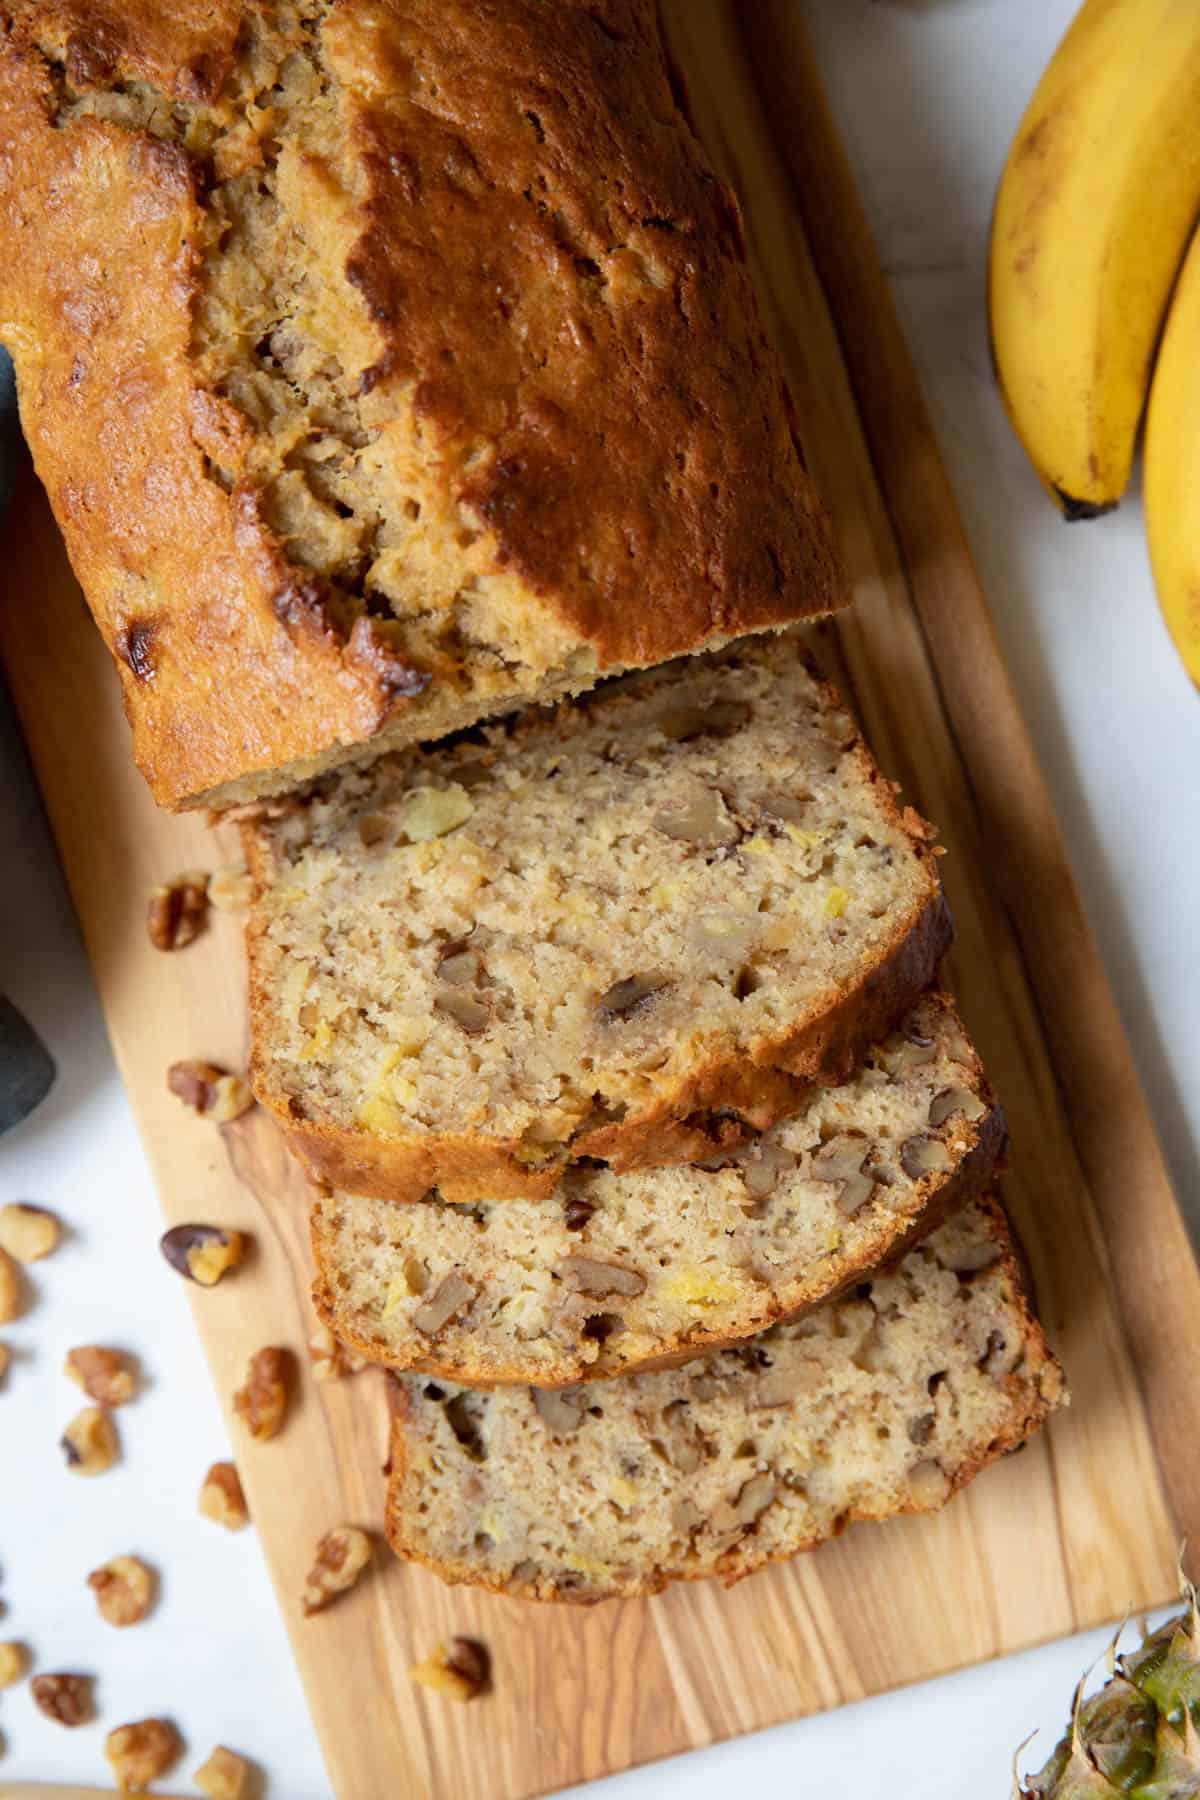 Half of a loaf of pineapple and banana bread is sliced and sitting on a wooden bread board for serving.